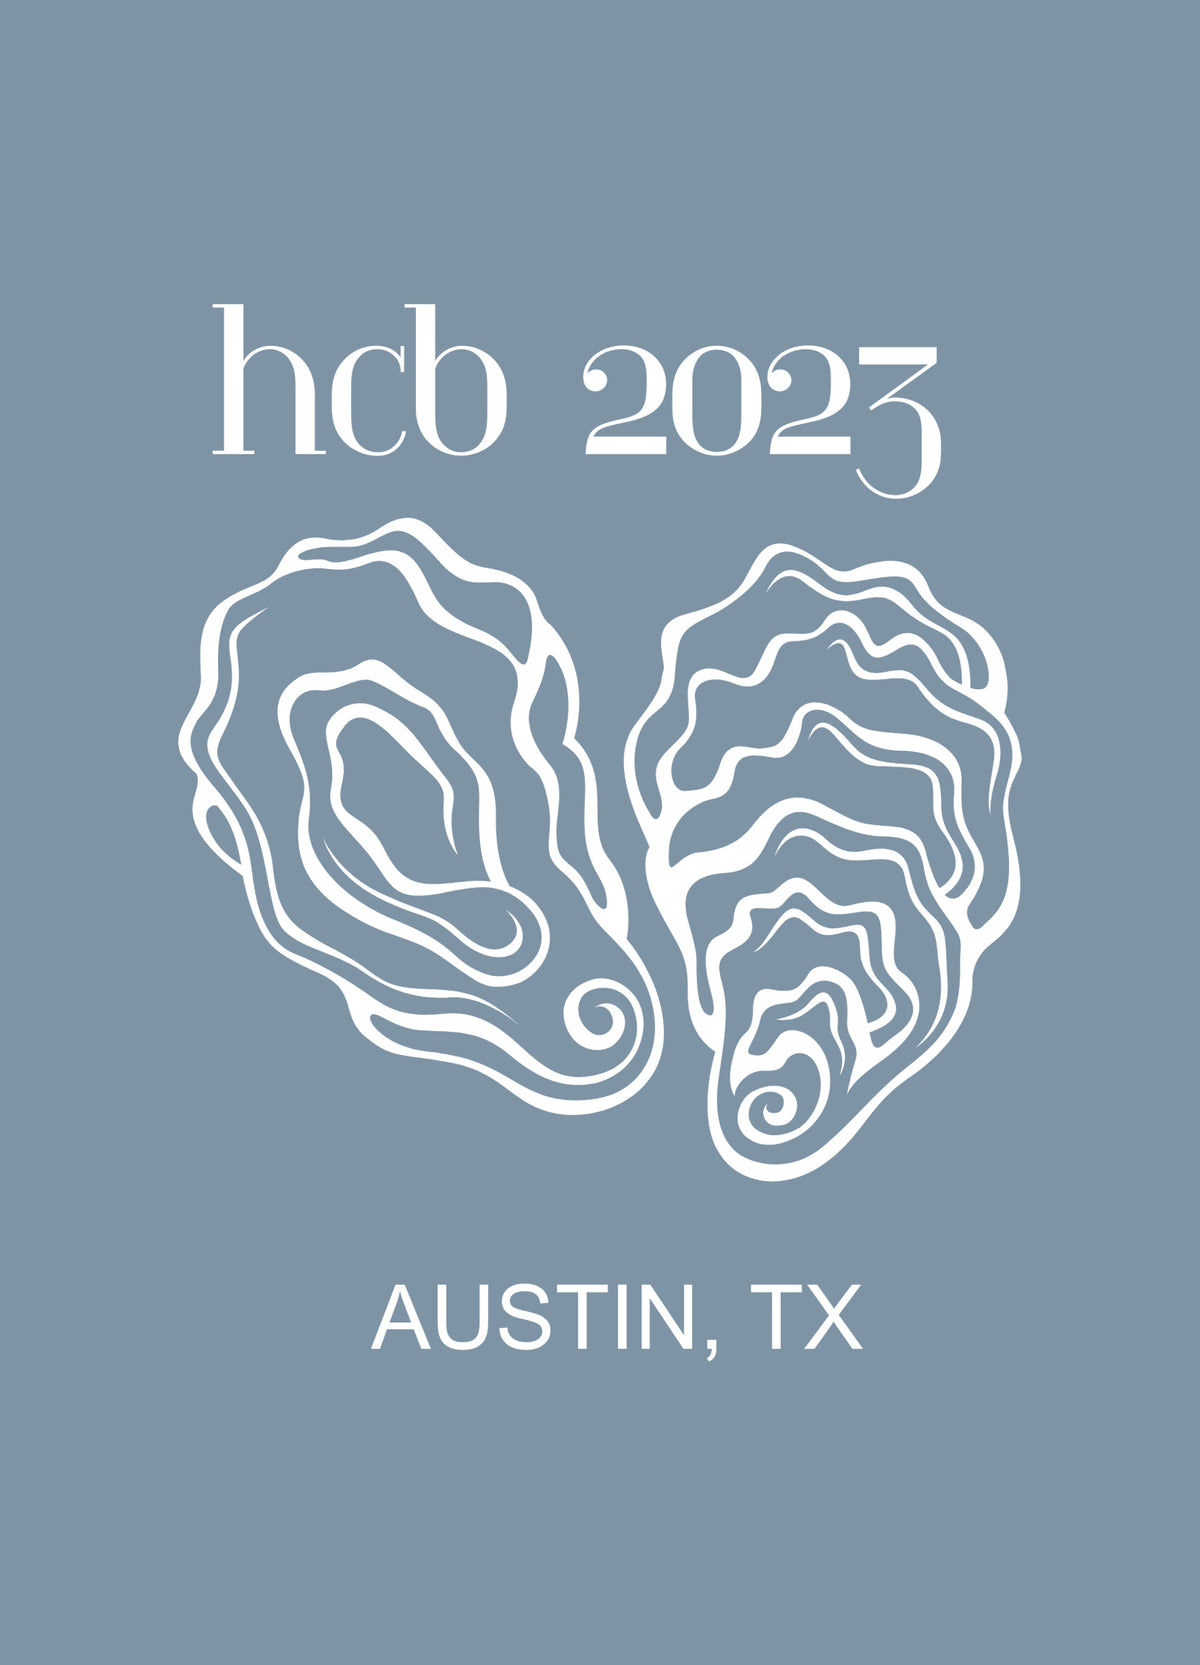 2023 Tee by Hill Country Boil